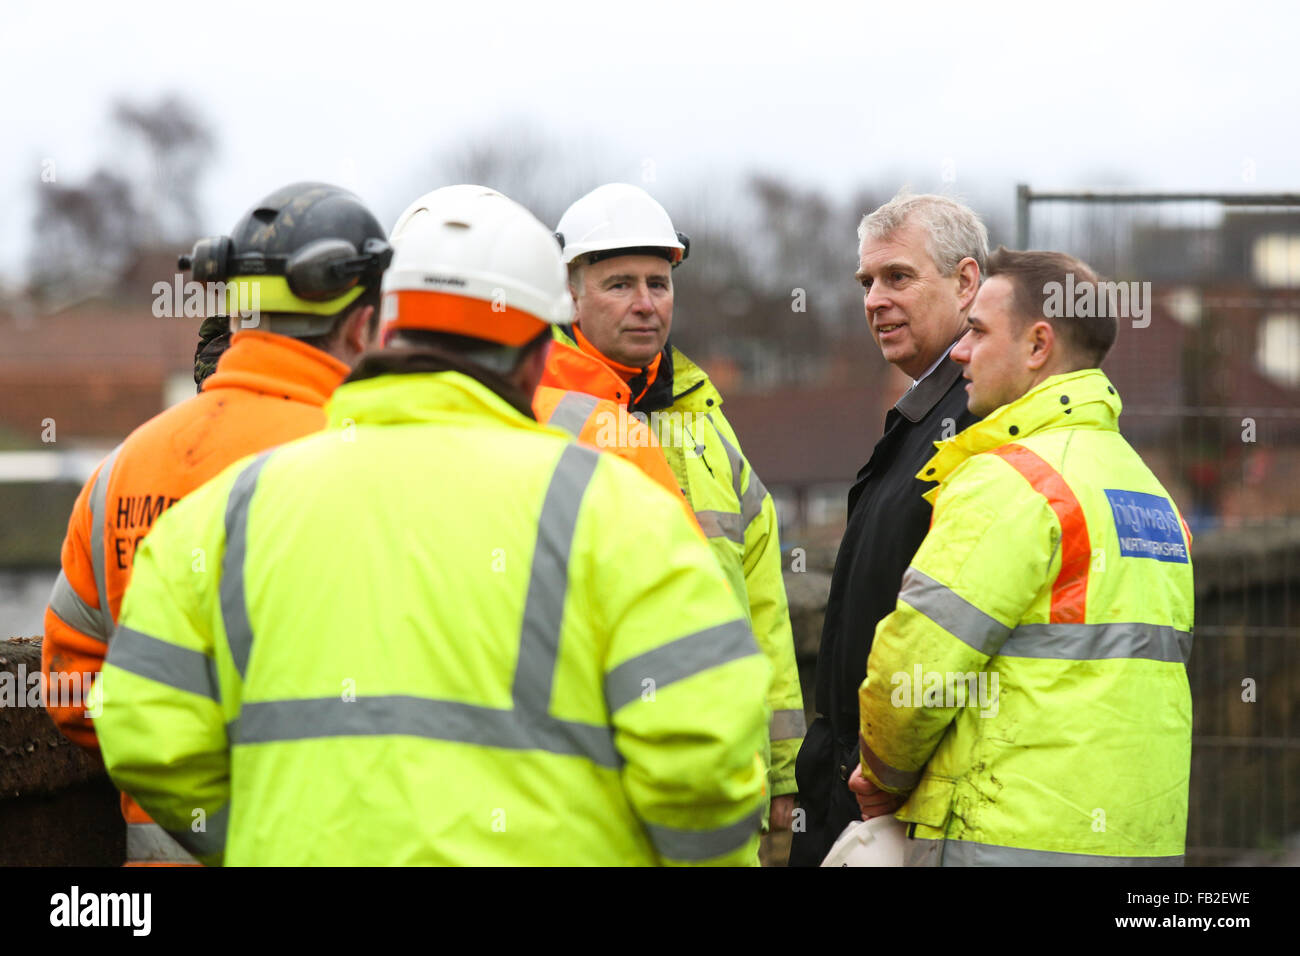 Prince Andrew, The Duke of York, talks to workers on Tadcaster Bridge during a visit to the town of Tadcaster in North Yorkshire to see the damage caused by flooding in the last month. The town was heavily affected after the River Wharfe burst it's banks causing the bridge to partially collapse. Credit:  Ian Hinchliffe/Alamy Live News Stock Photo